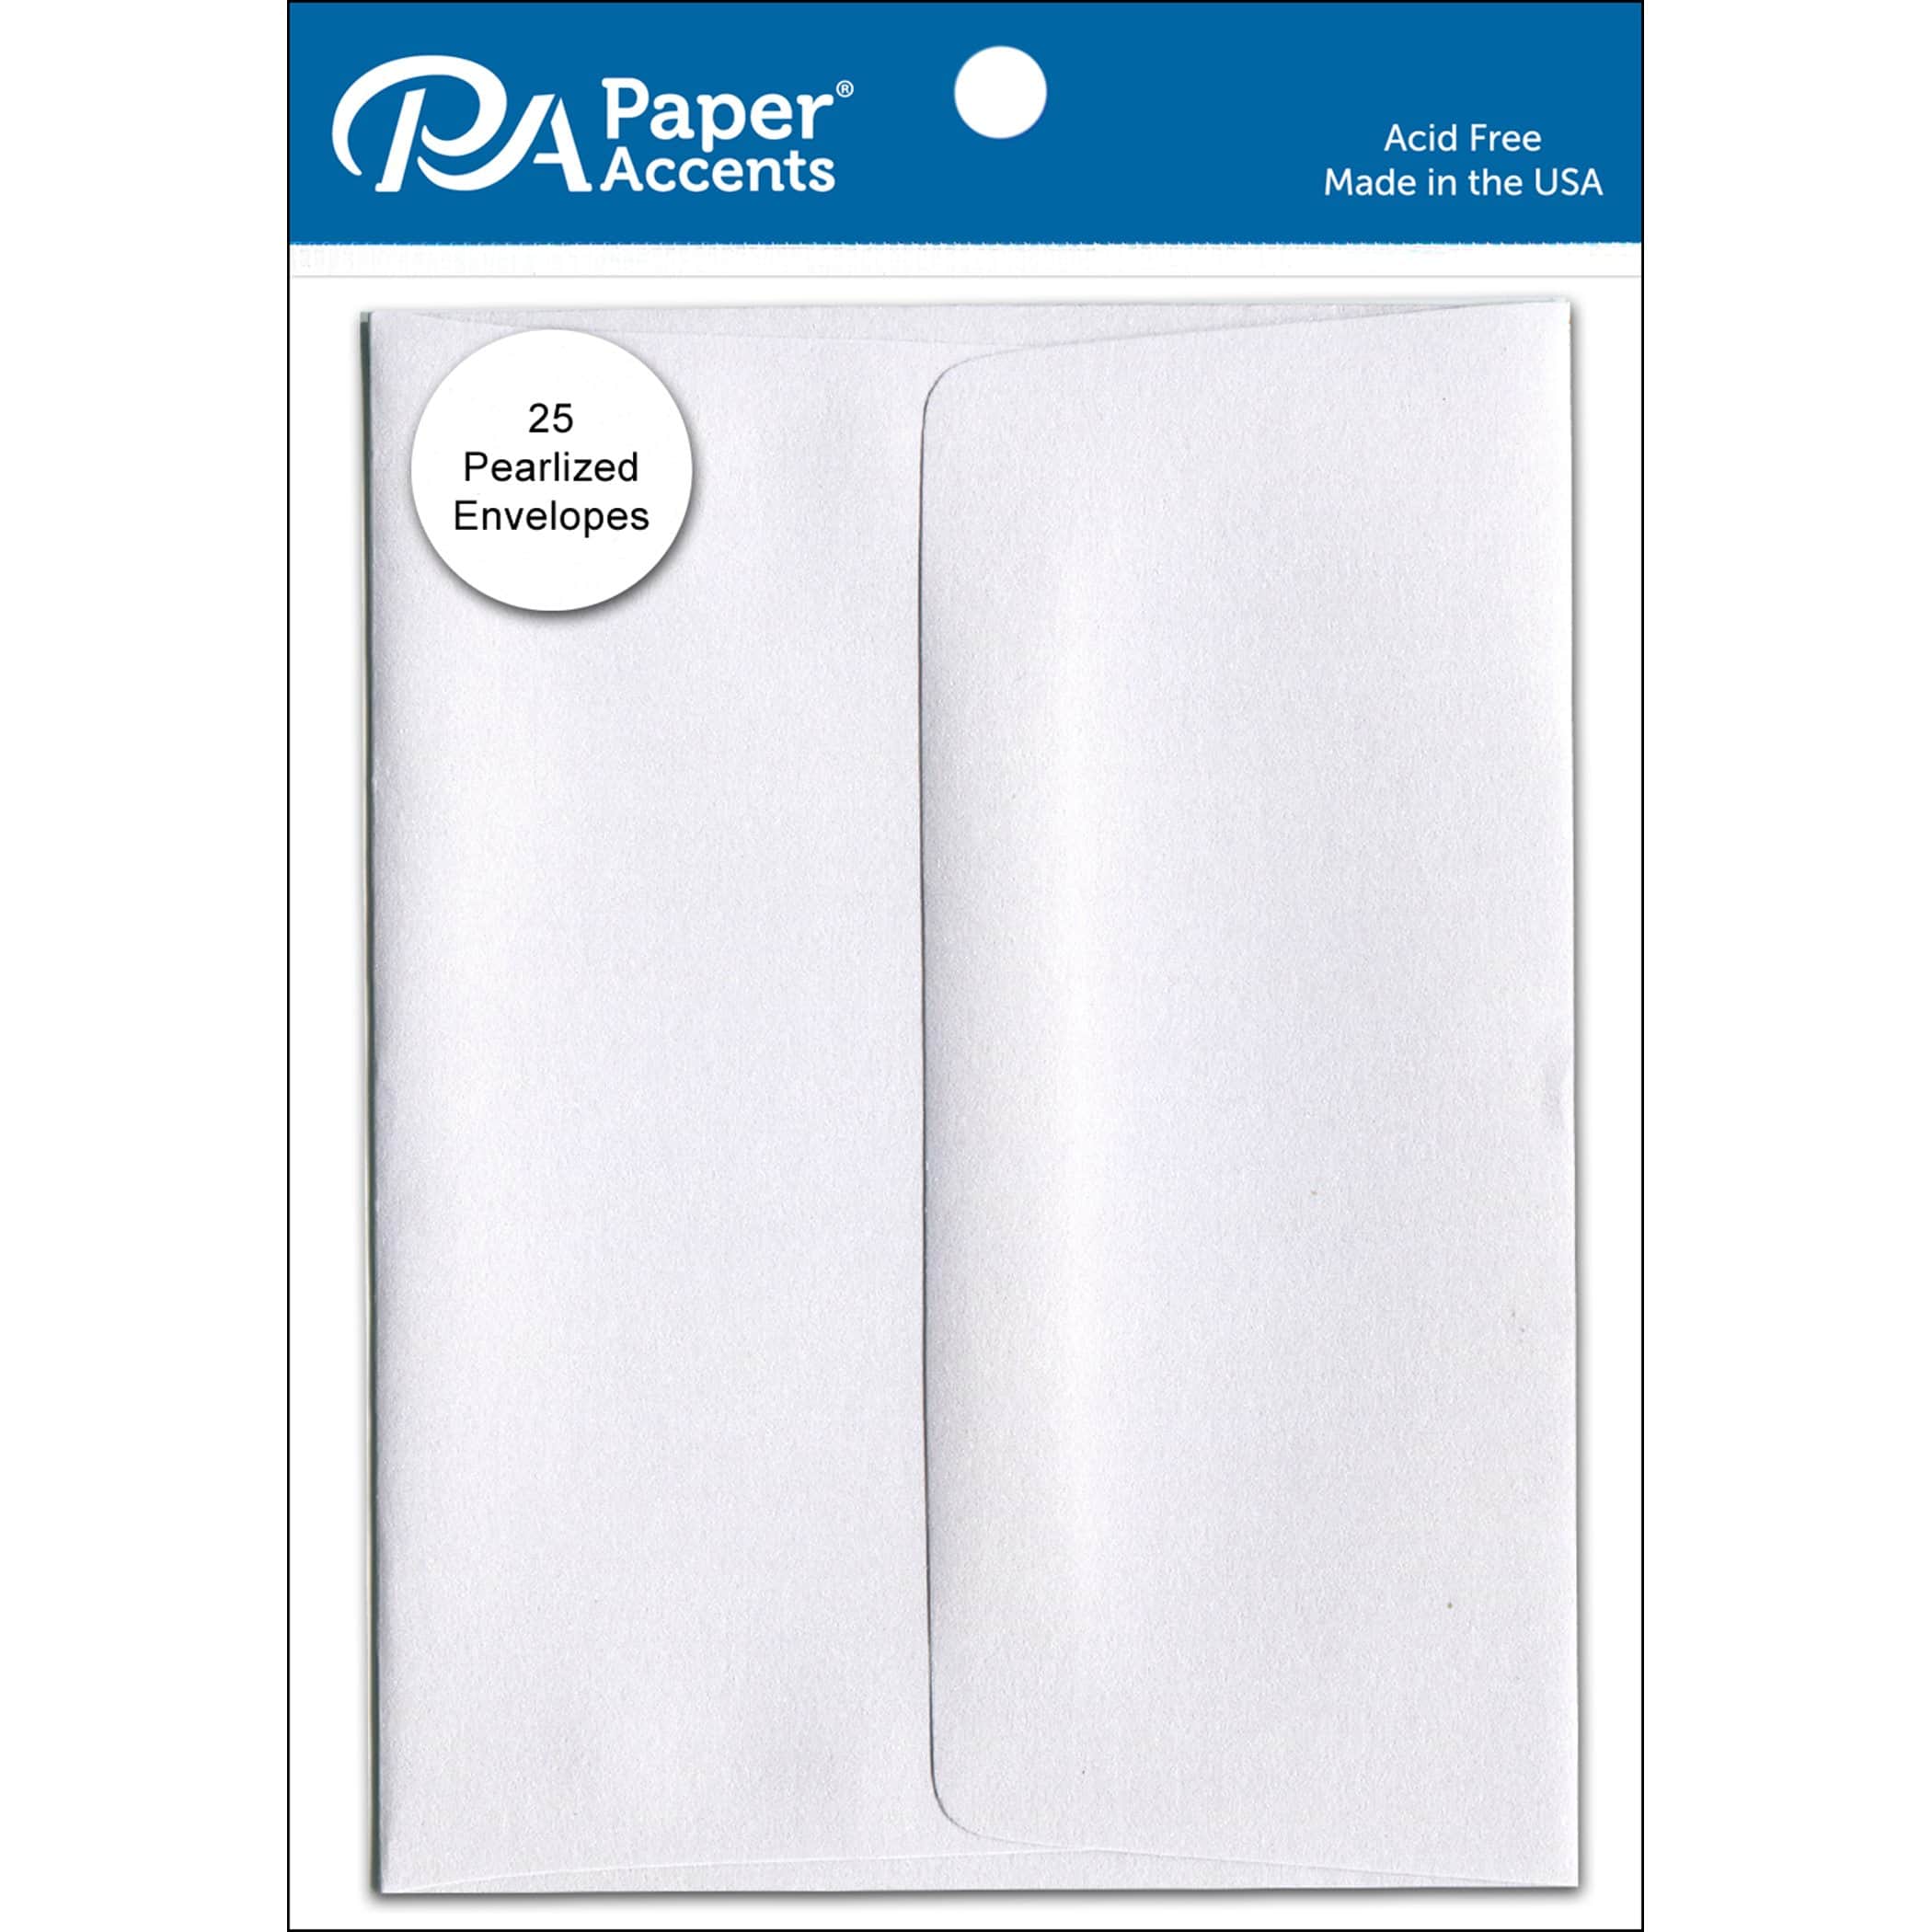 PA Paper&#x2122; Accents 4.38&#x22; x 5.75&#x22; Pearlized Envelope, 25ct.